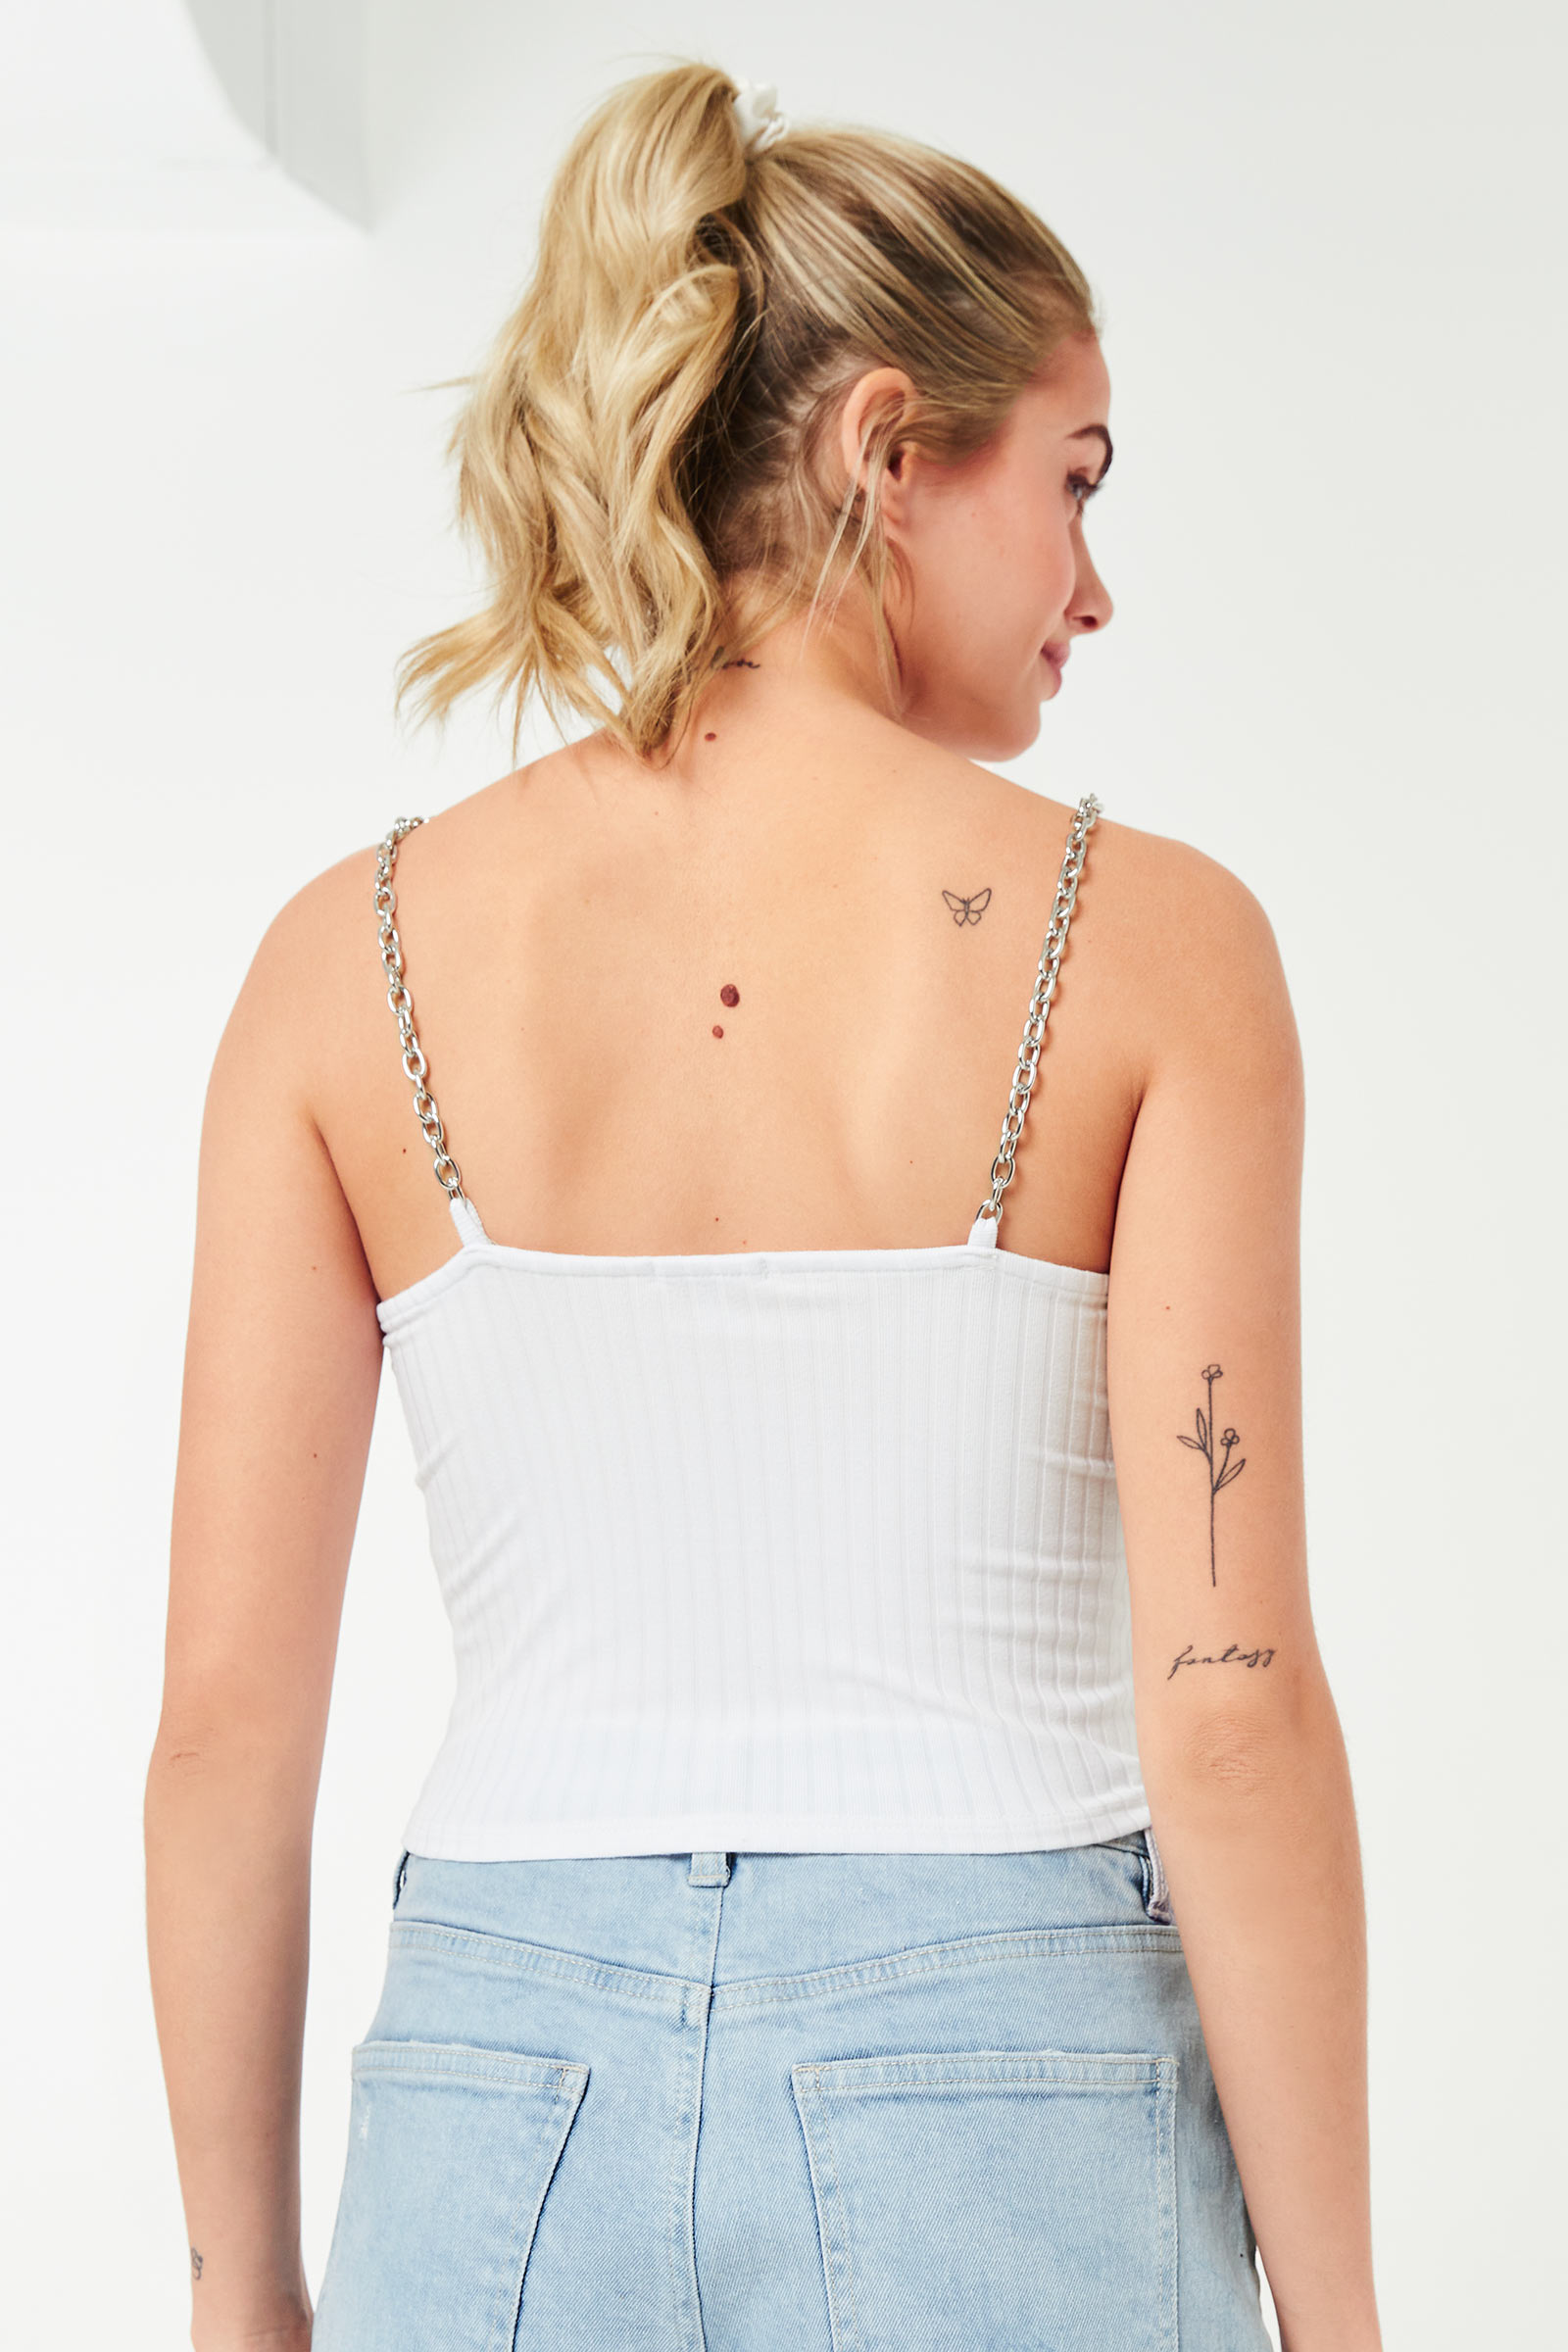 Crop Tank Top with Chain Straps